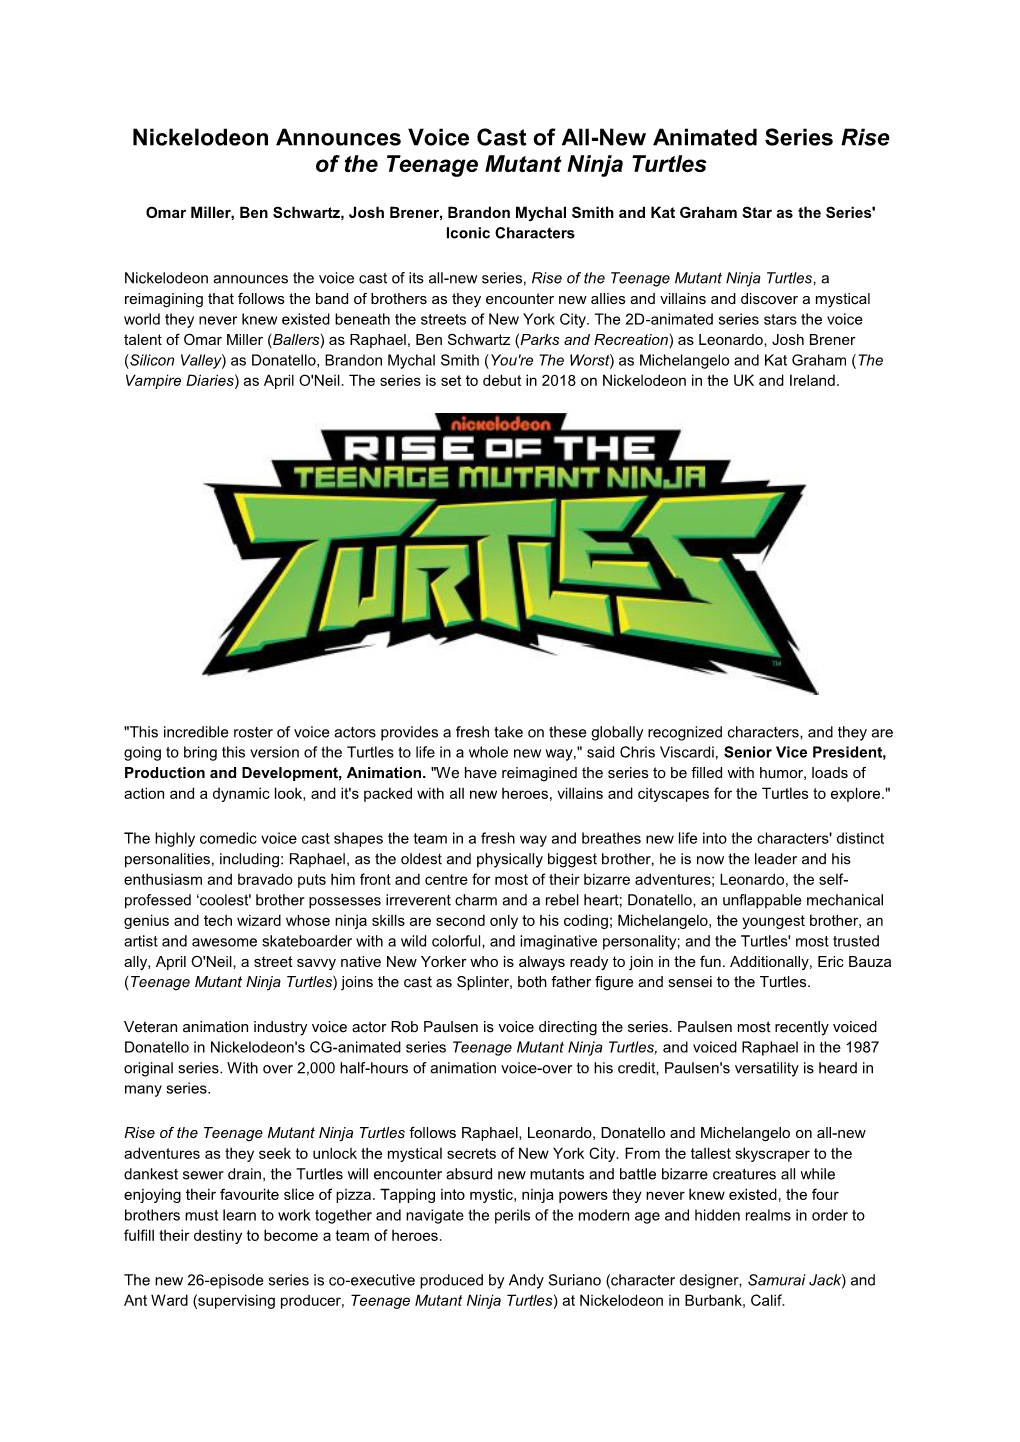 Nickelodeon Announces Voice Cast of All-New Animated Series Rise of the Teenage Mutant Ninja Turtles